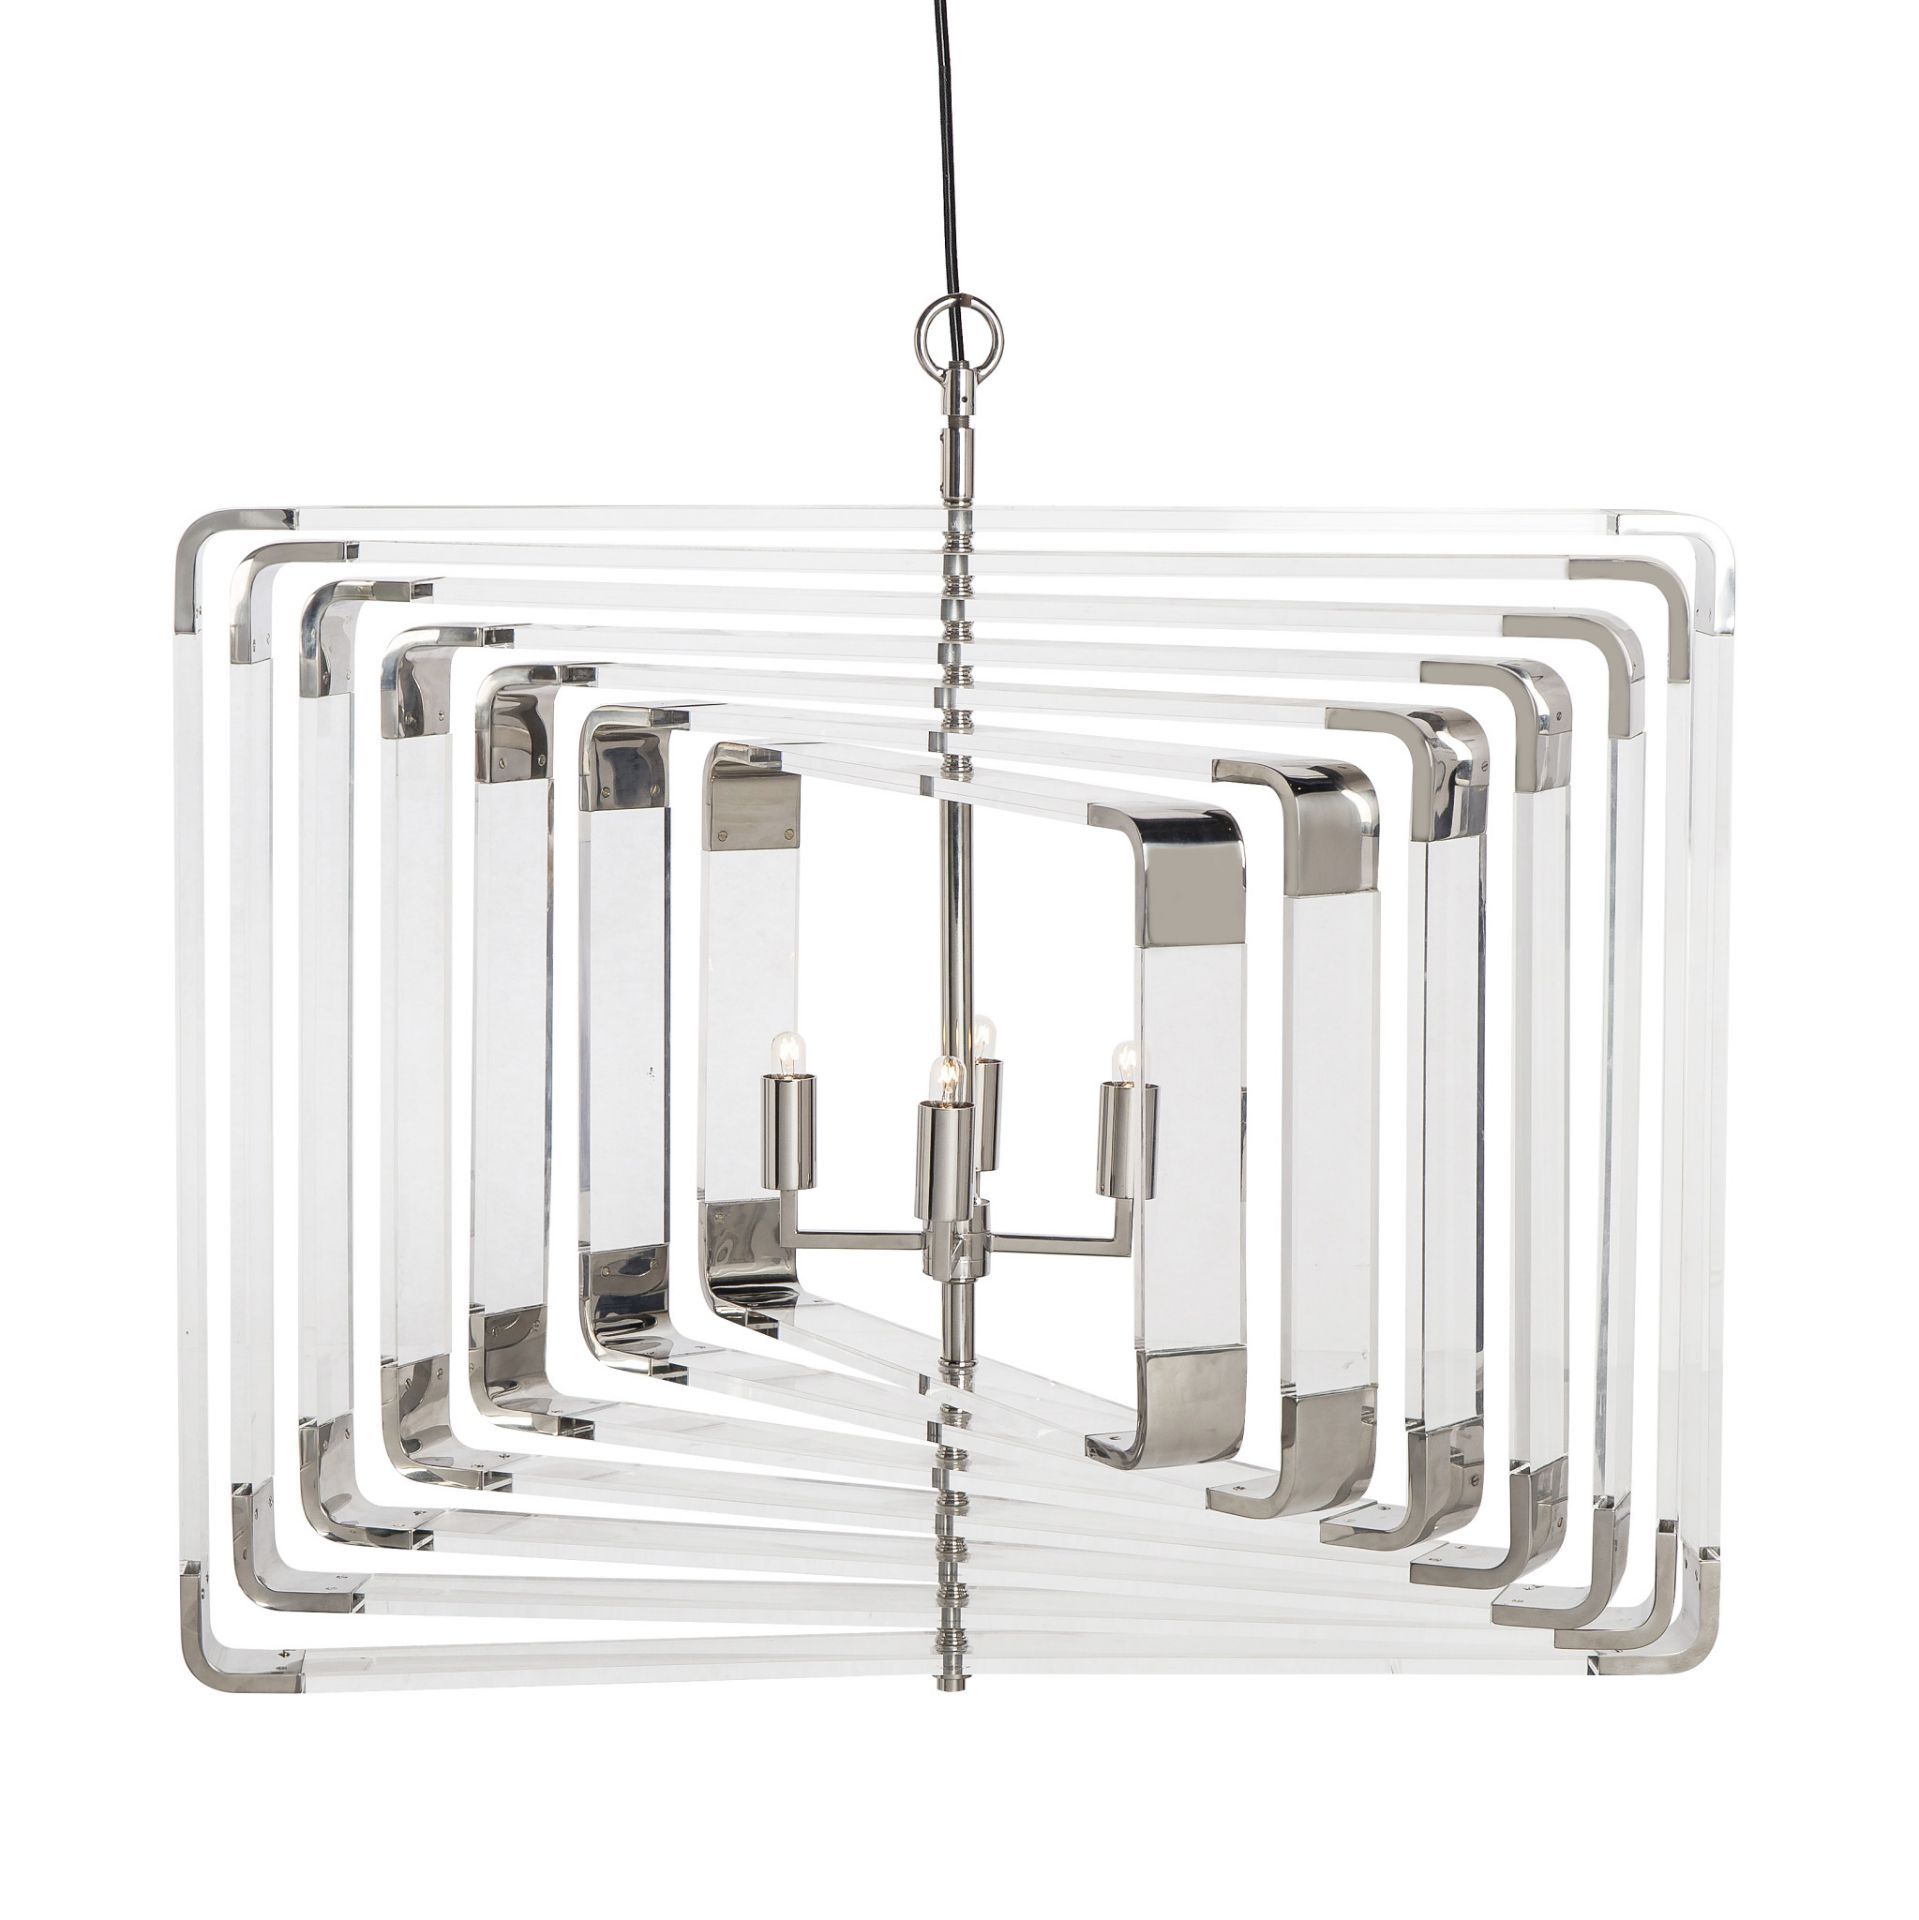 1 x Sonder Living Spiral Acrylic 7-Layer Light With Nickel Finish - New Boxed Stock - Ref: - Image 3 of 8